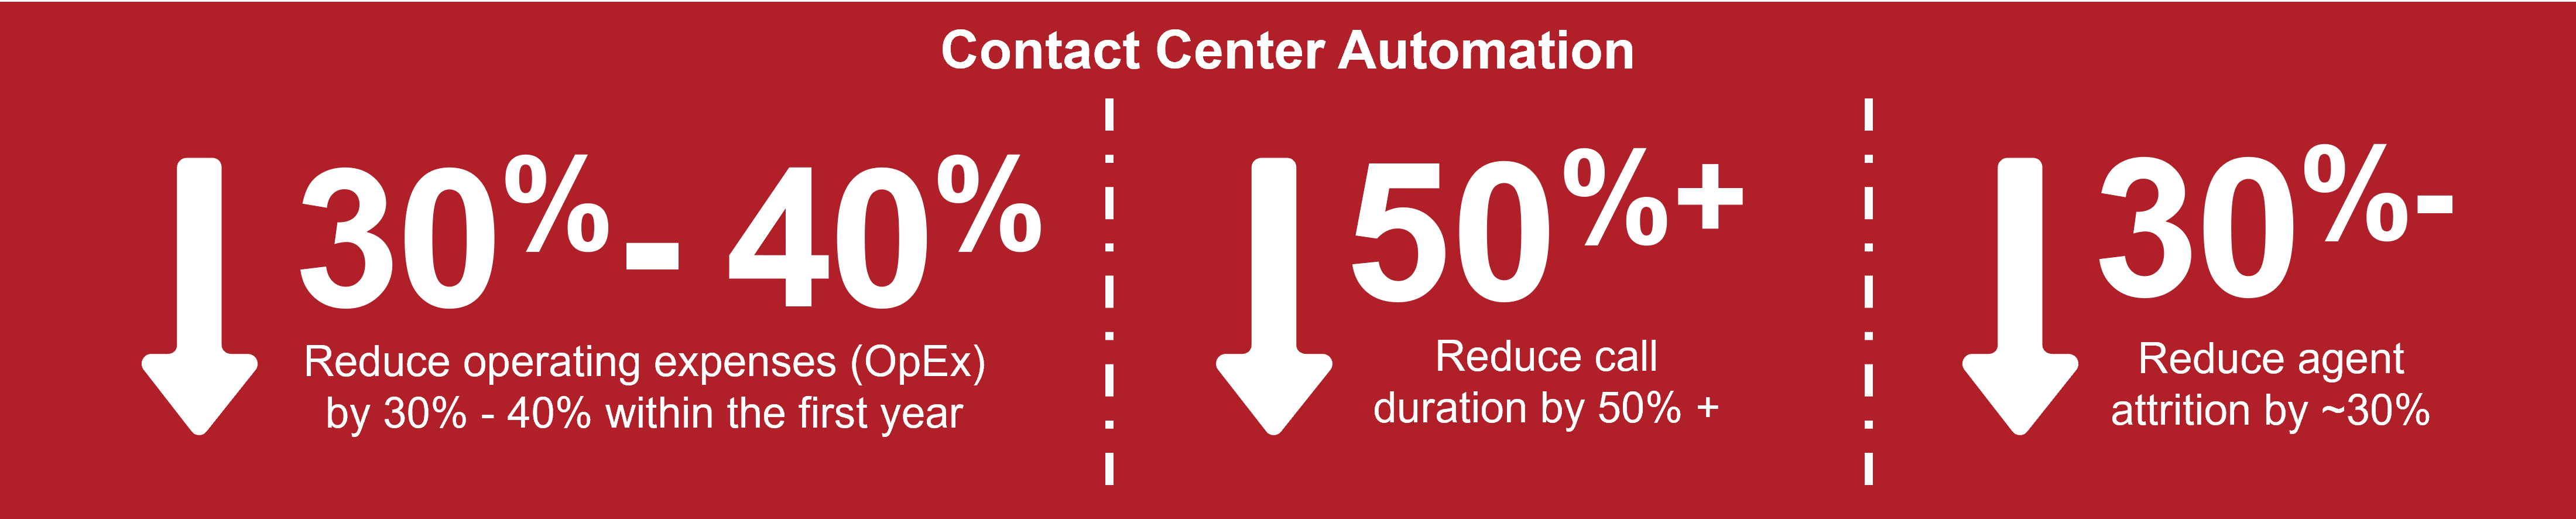 Benefits of Contact Center Automation with title